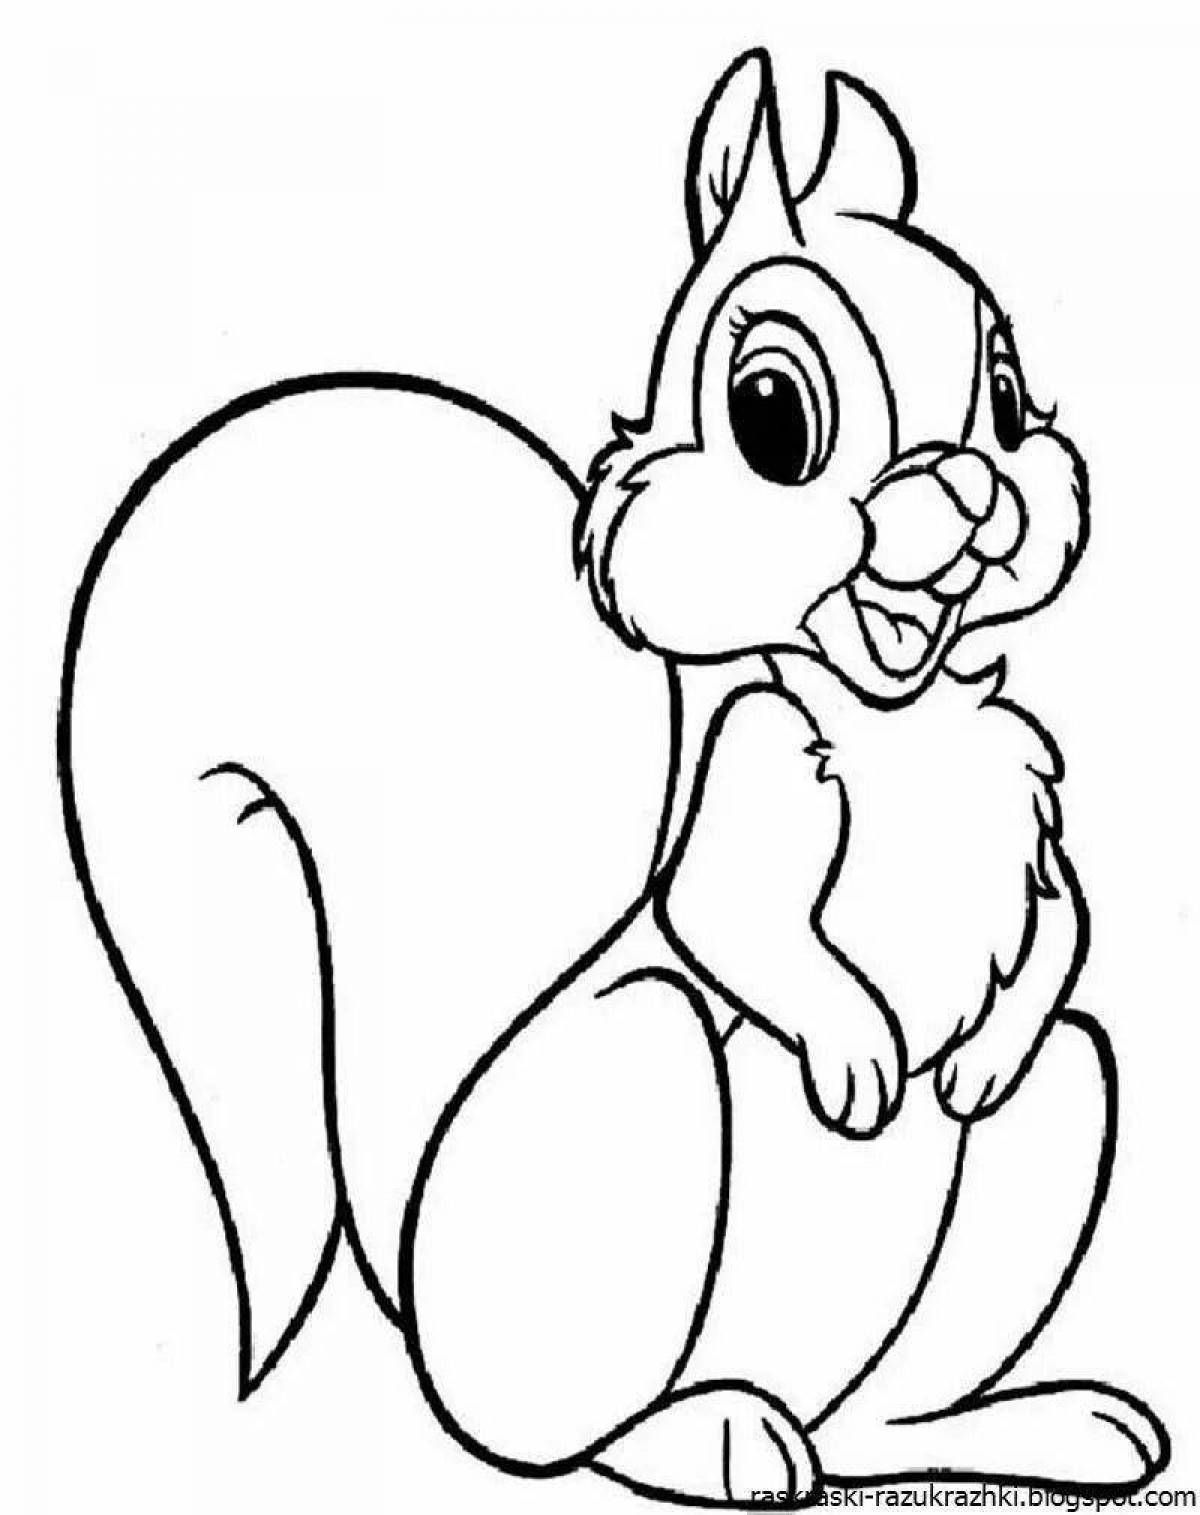 Creative squirrel coloring for kids